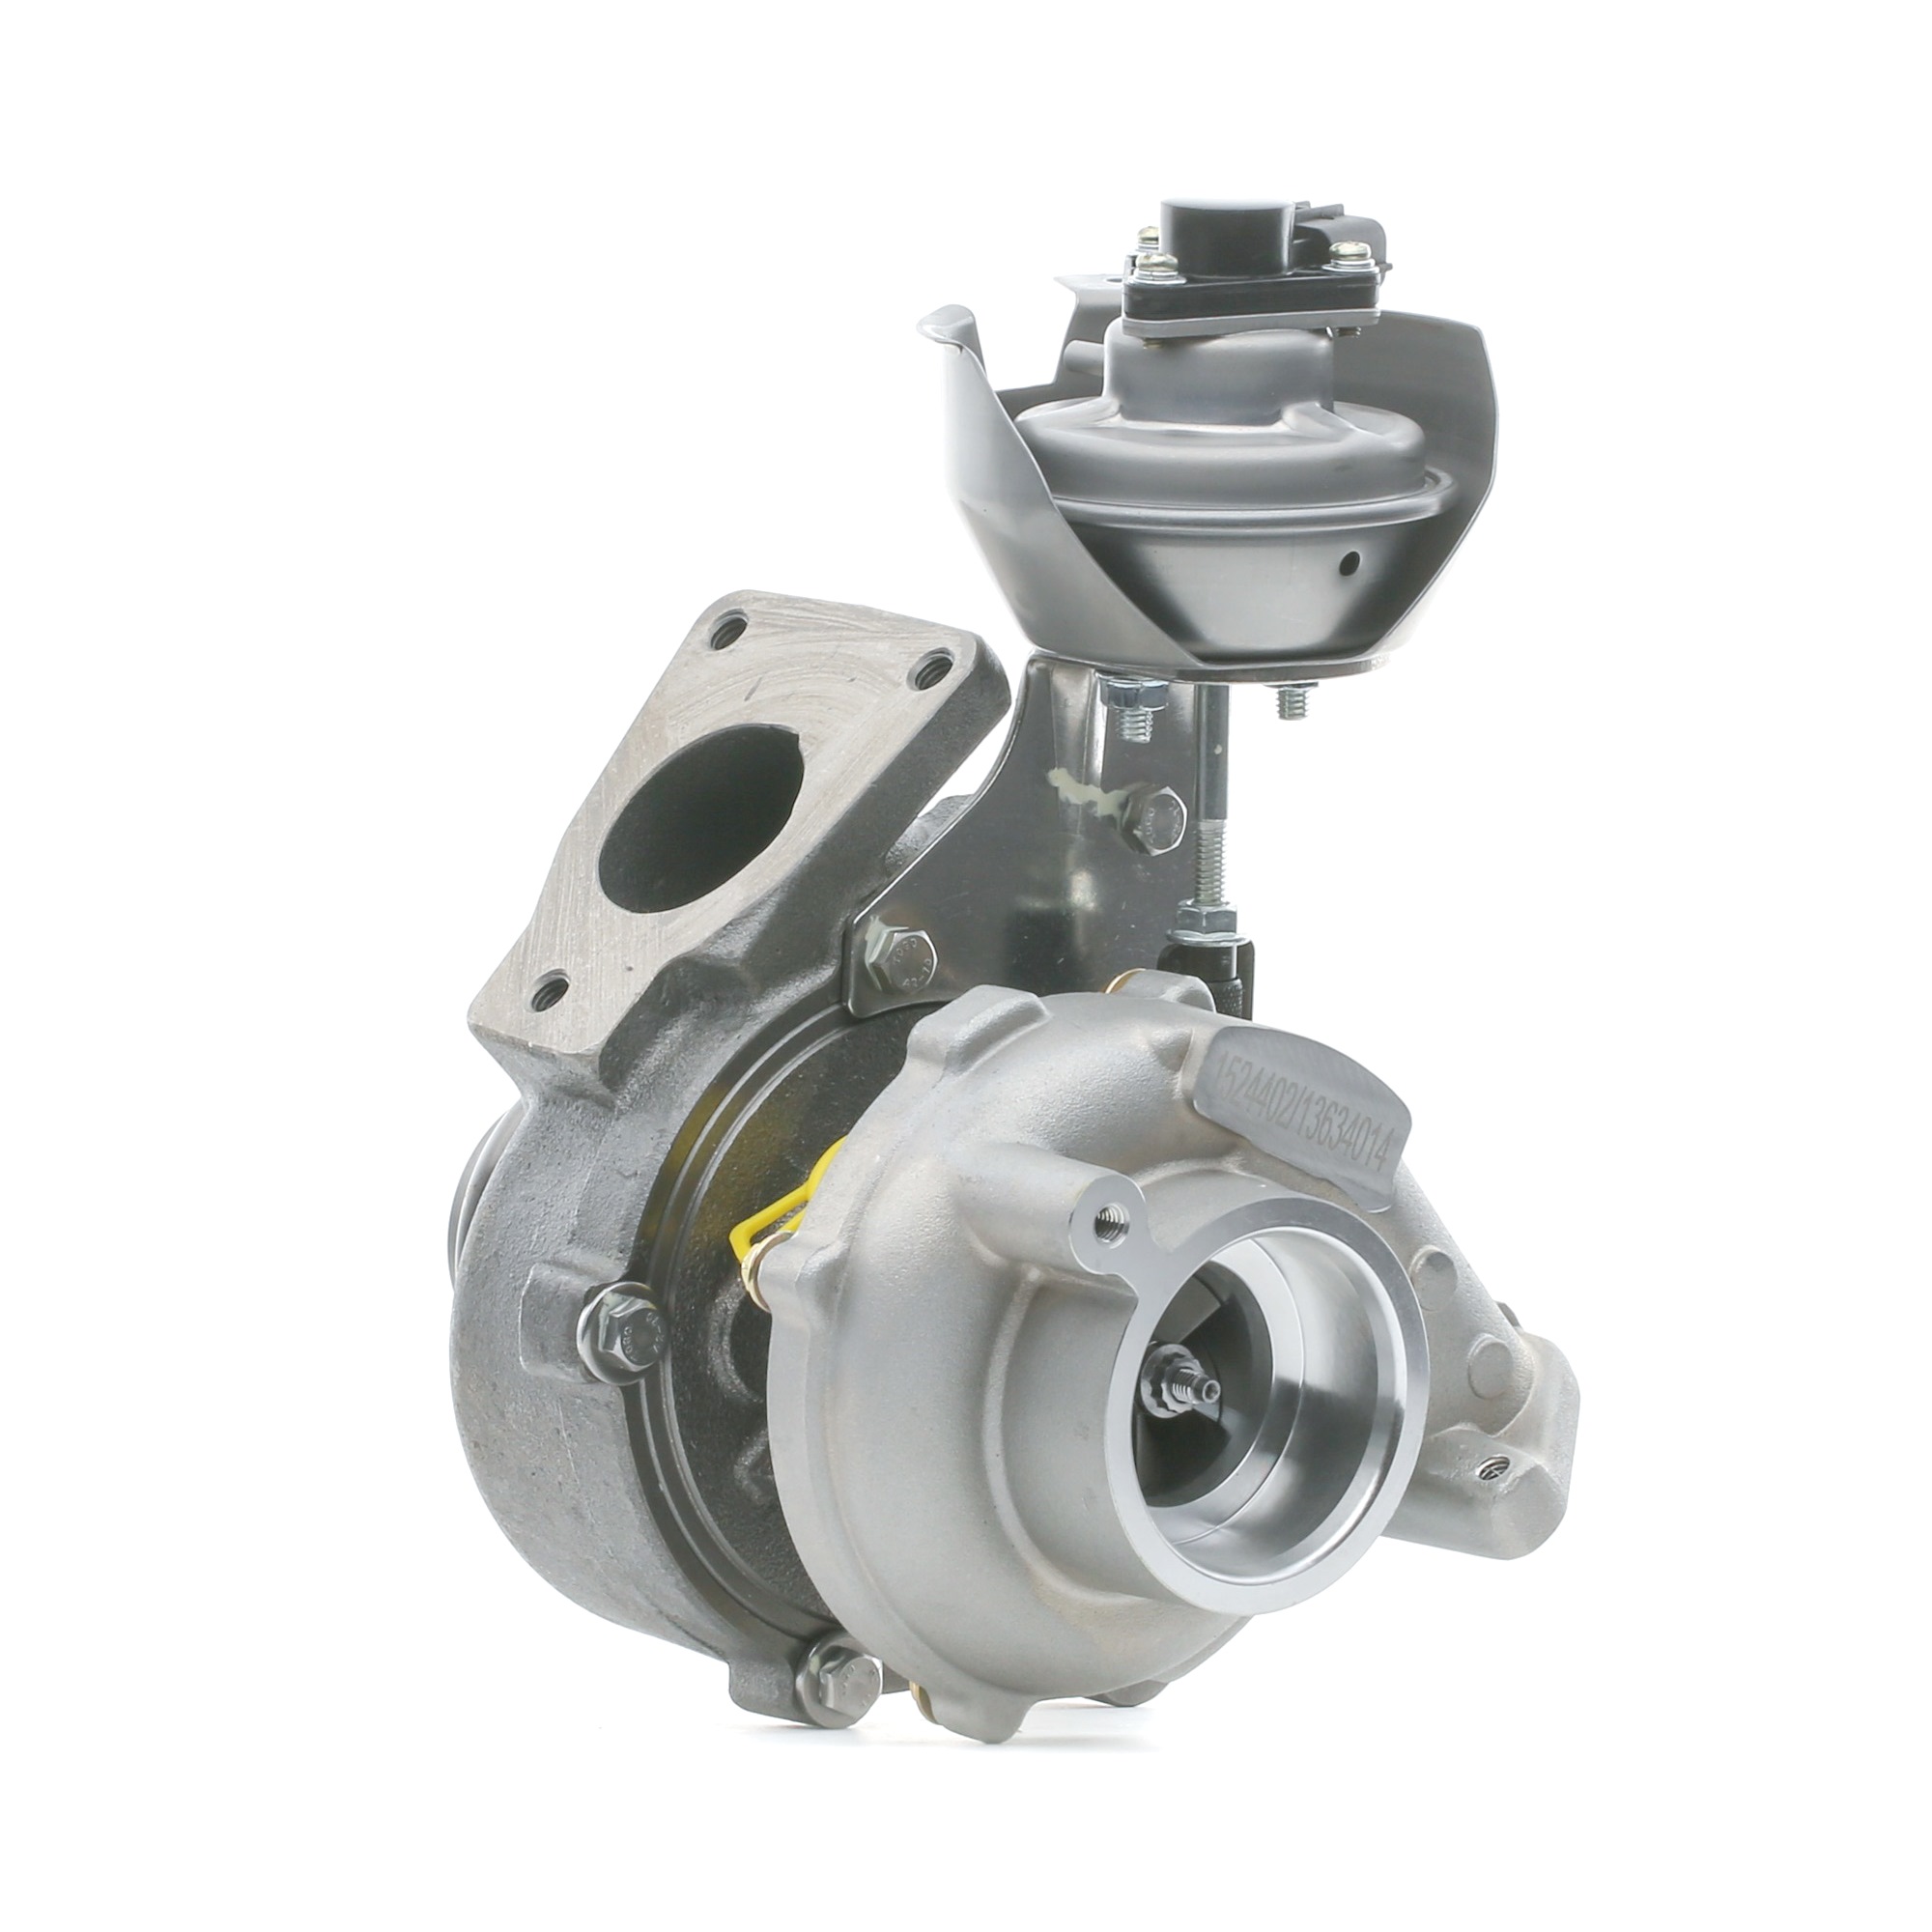 RIDEX 2234C0040 Turbocharger Exhaust Turbocharger, Turbocharger/Supercharger, Pneumatically controlled actuator, Euro 3, Euro 4